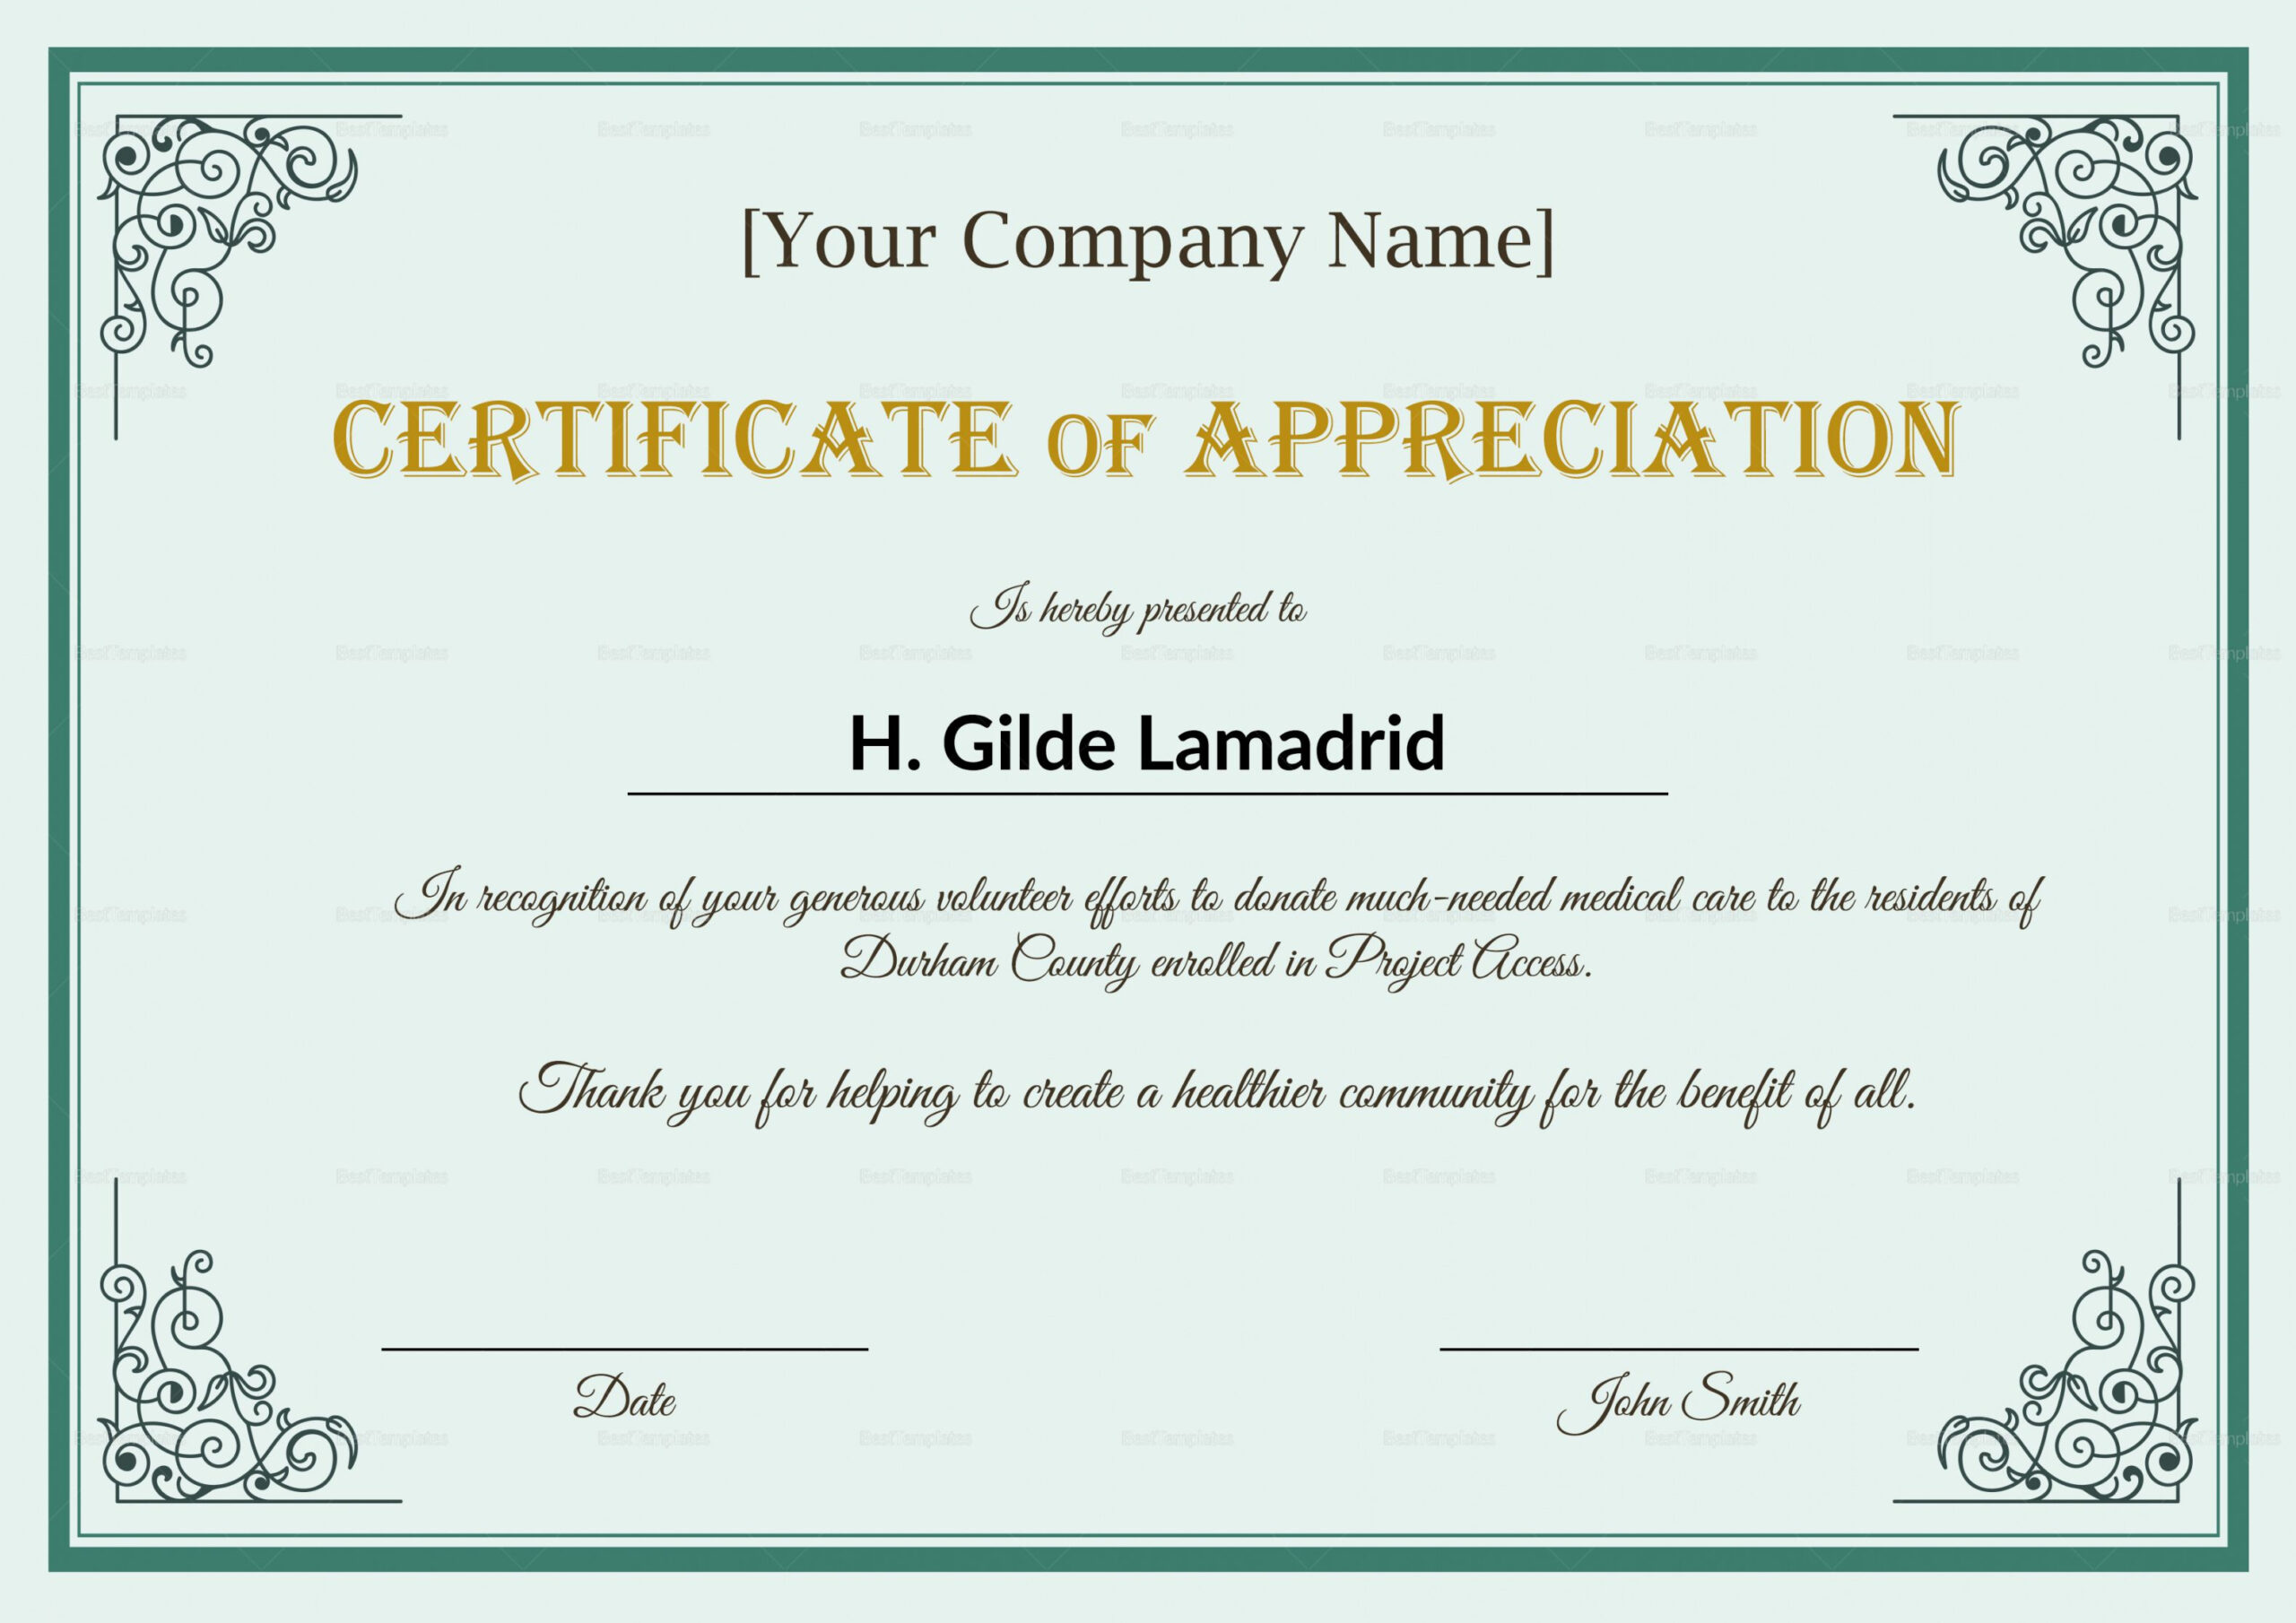 Get Our Free Employee Appreciation Certificate Template | Certificate within Template For Certificate Of Appreciation In Microsoft Word